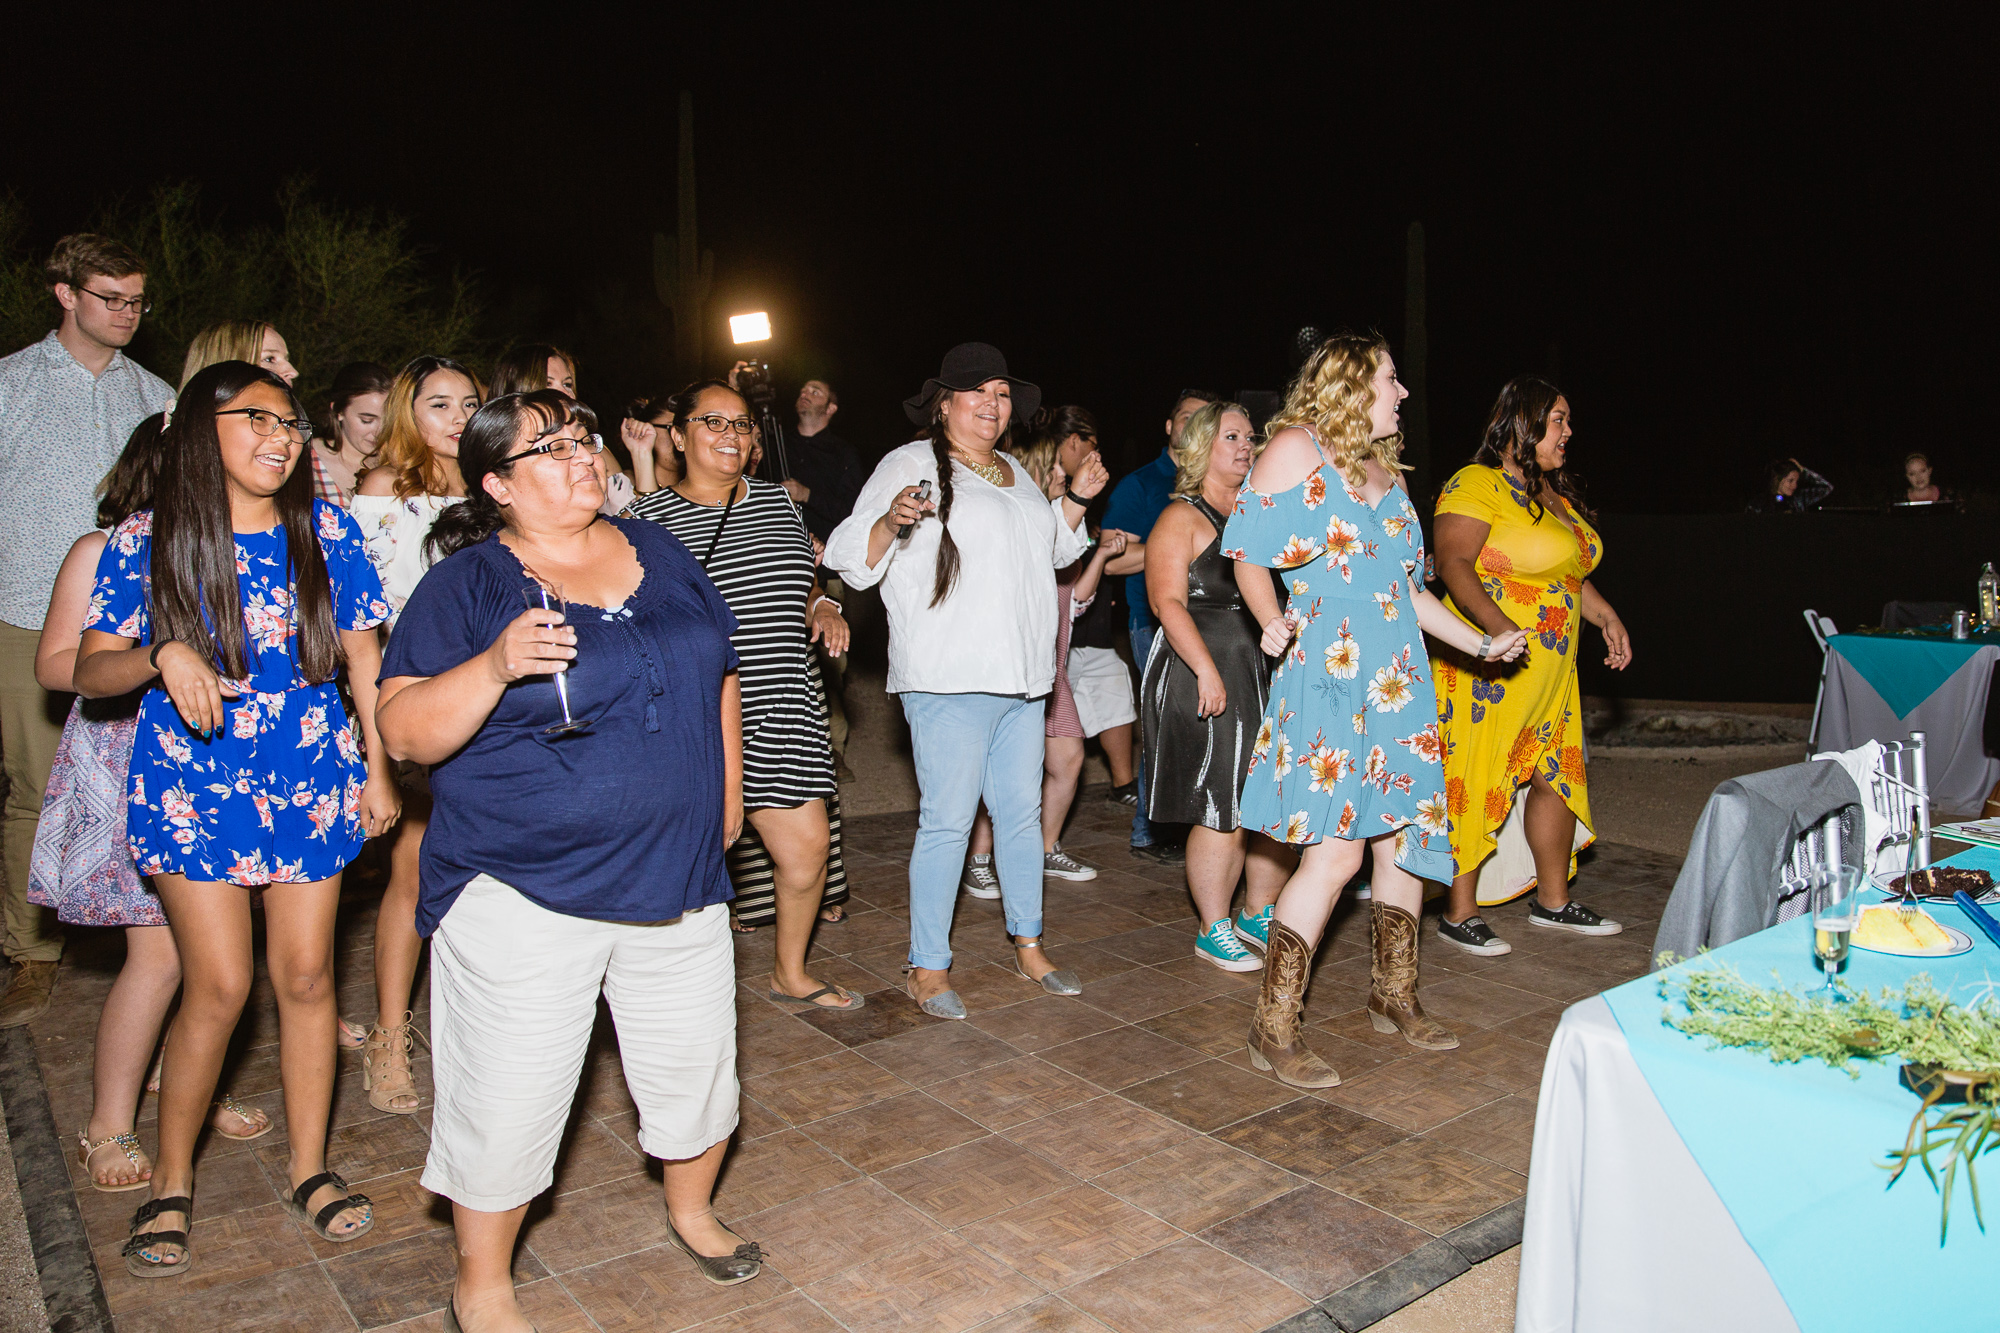 Guests line dancing at a wedding reception by wedding photographer PMA Photography.